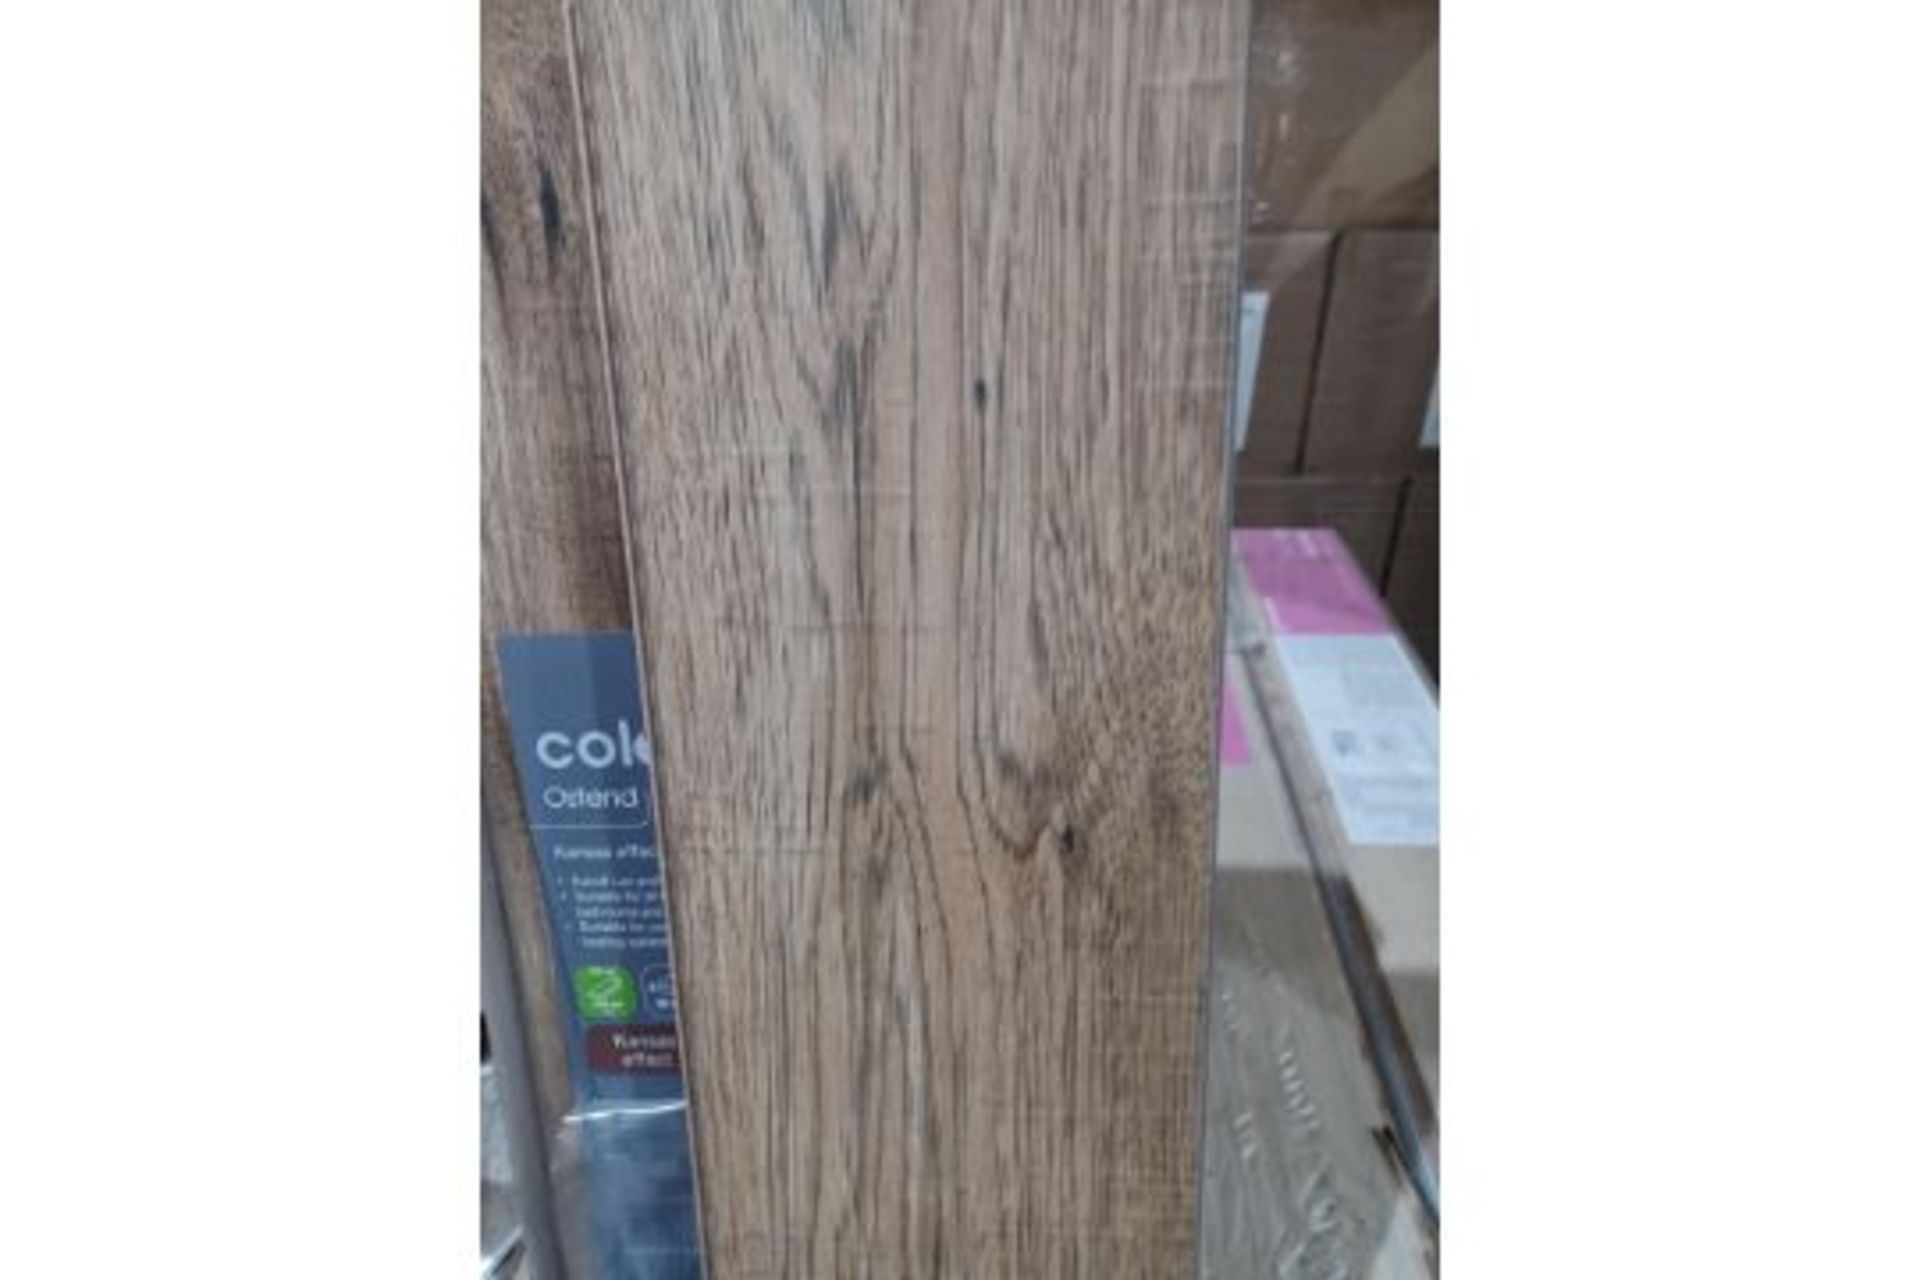 2 X PACKS OF Ostend Natural Oxford oak effect Flooring. EACH PACK CONTAINS 1.76m2, GIVING THIS LOT A - Image 2 of 2